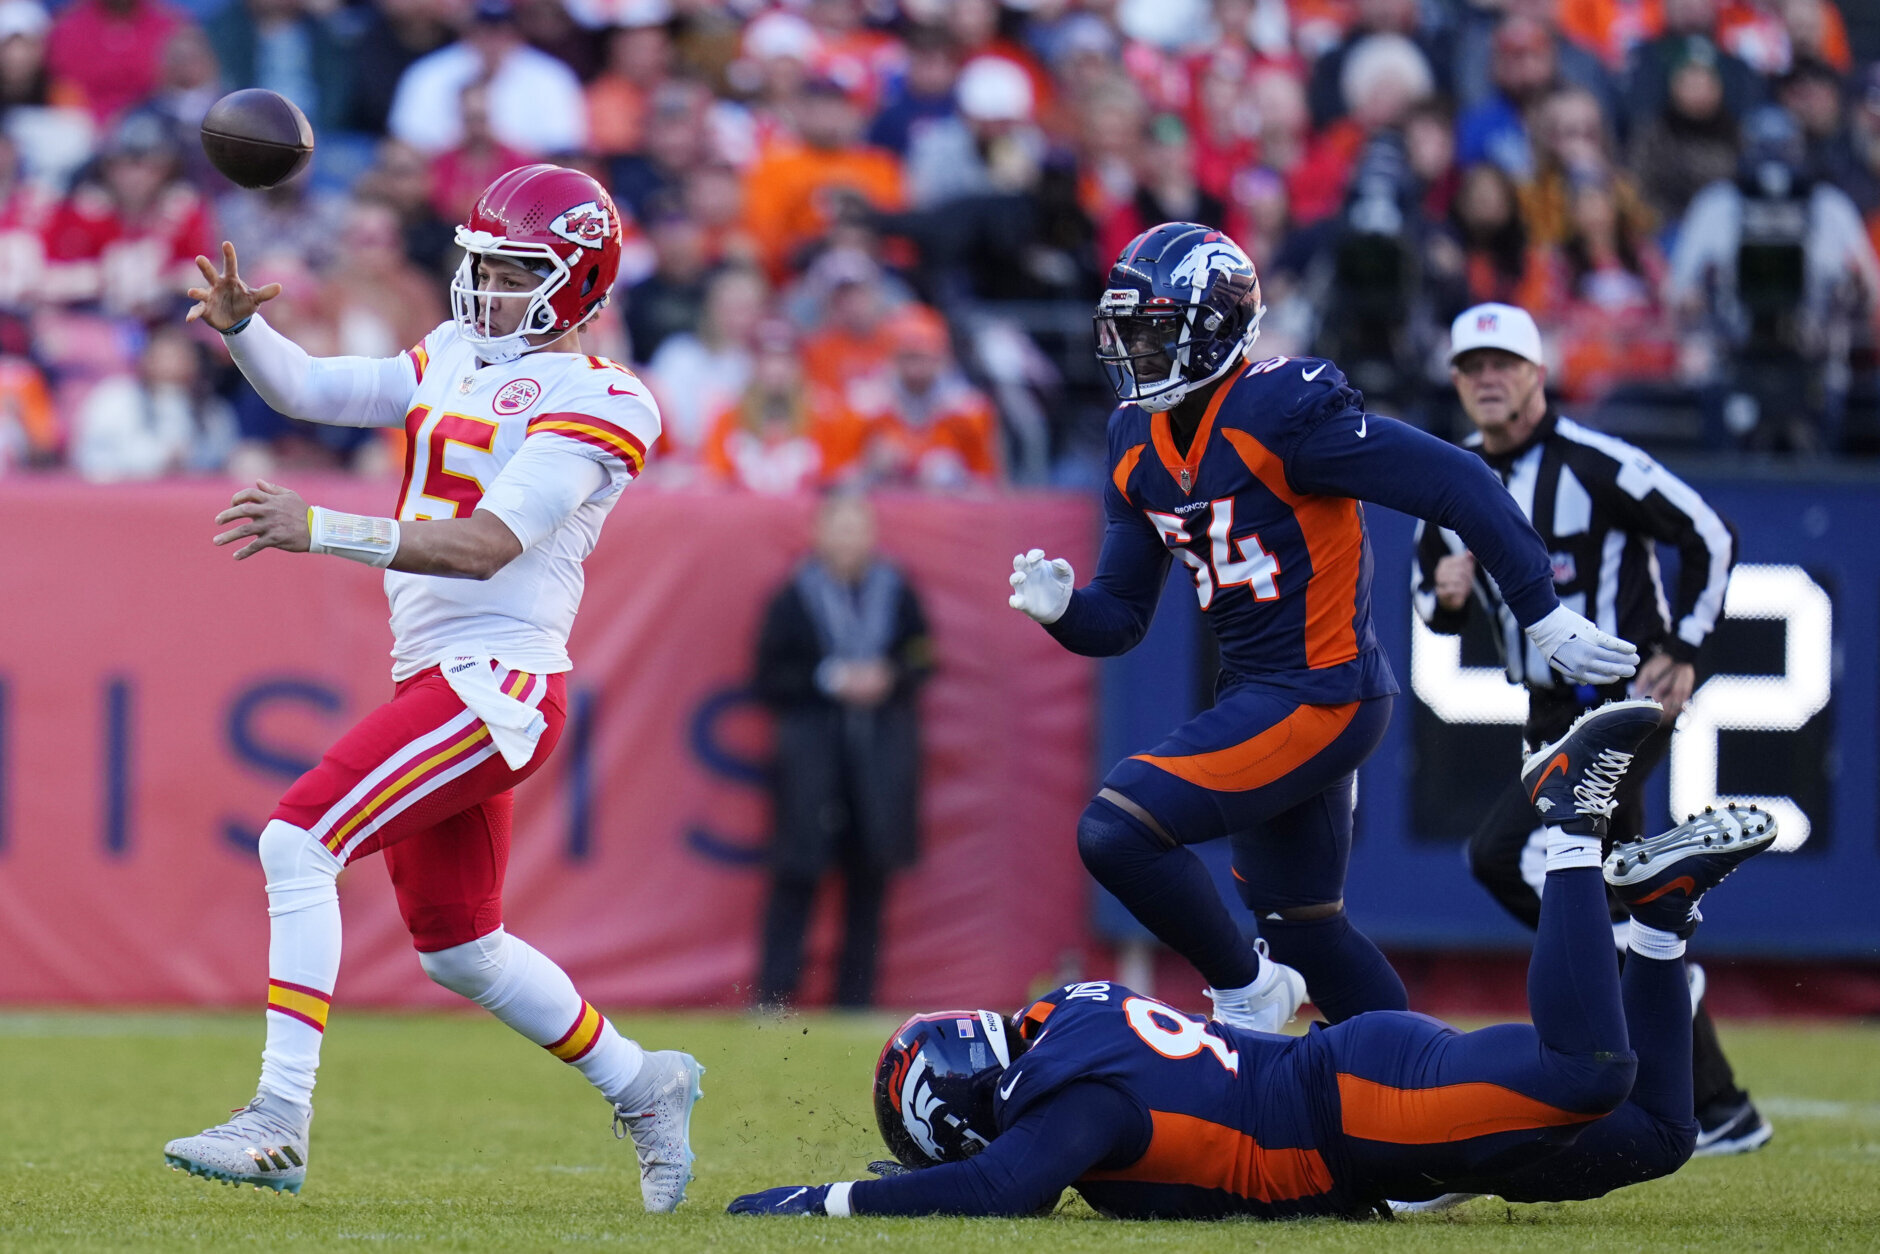 <p><em><strong>Chiefs 34</strong></em><br />
<em><strong>Broncos 28</strong></em></p>
<p>Patrick Mahomes is just filthy.</p>
<blockquote class="twitter-tweet" data-width="500" data-dnt="true">
<p lang="en" dir="ltr">Mahomes magic! 🪄</p>
<p>📺: <a href="https://twitter.com/hashtag/KCvsDEN?src=hash&amp;ref_src=twsrc%5Etfw">#KCvsDEN</a> on CBS<br />📱: Stream on NFL+ <a href="https://t.co/TzmdzbFm9o">https://t.co/TzmdzbFm9o</a> <a href="https://t.co/AVyeGJYeHV">pic.twitter.com/AVyeGJYeHV</a></p>
<p>&mdash; NFL (@NFL) <a href="https://twitter.com/NFL/status/1602056800911491072?ref_src=twsrc%5Etfw">December 11, 2022</a></p></blockquote>
<p><script async src="https://platform.twitter.com/widgets.js" charset="utf-8"></script></p>
<p>And so is Kansas City: Eight straight seasons with double-digit wins. A whopping 15 straight wins over Denver, who is now mired in a third straight 10-loss season to be eliminated from playoff contention. It&#8217;s as good to be the Chiefs as much as it sucks to be the Broncos — a team that still can&#8217;t win even when Russell Wilson actually looked like Russell Wilson for the first time all year.</p>
